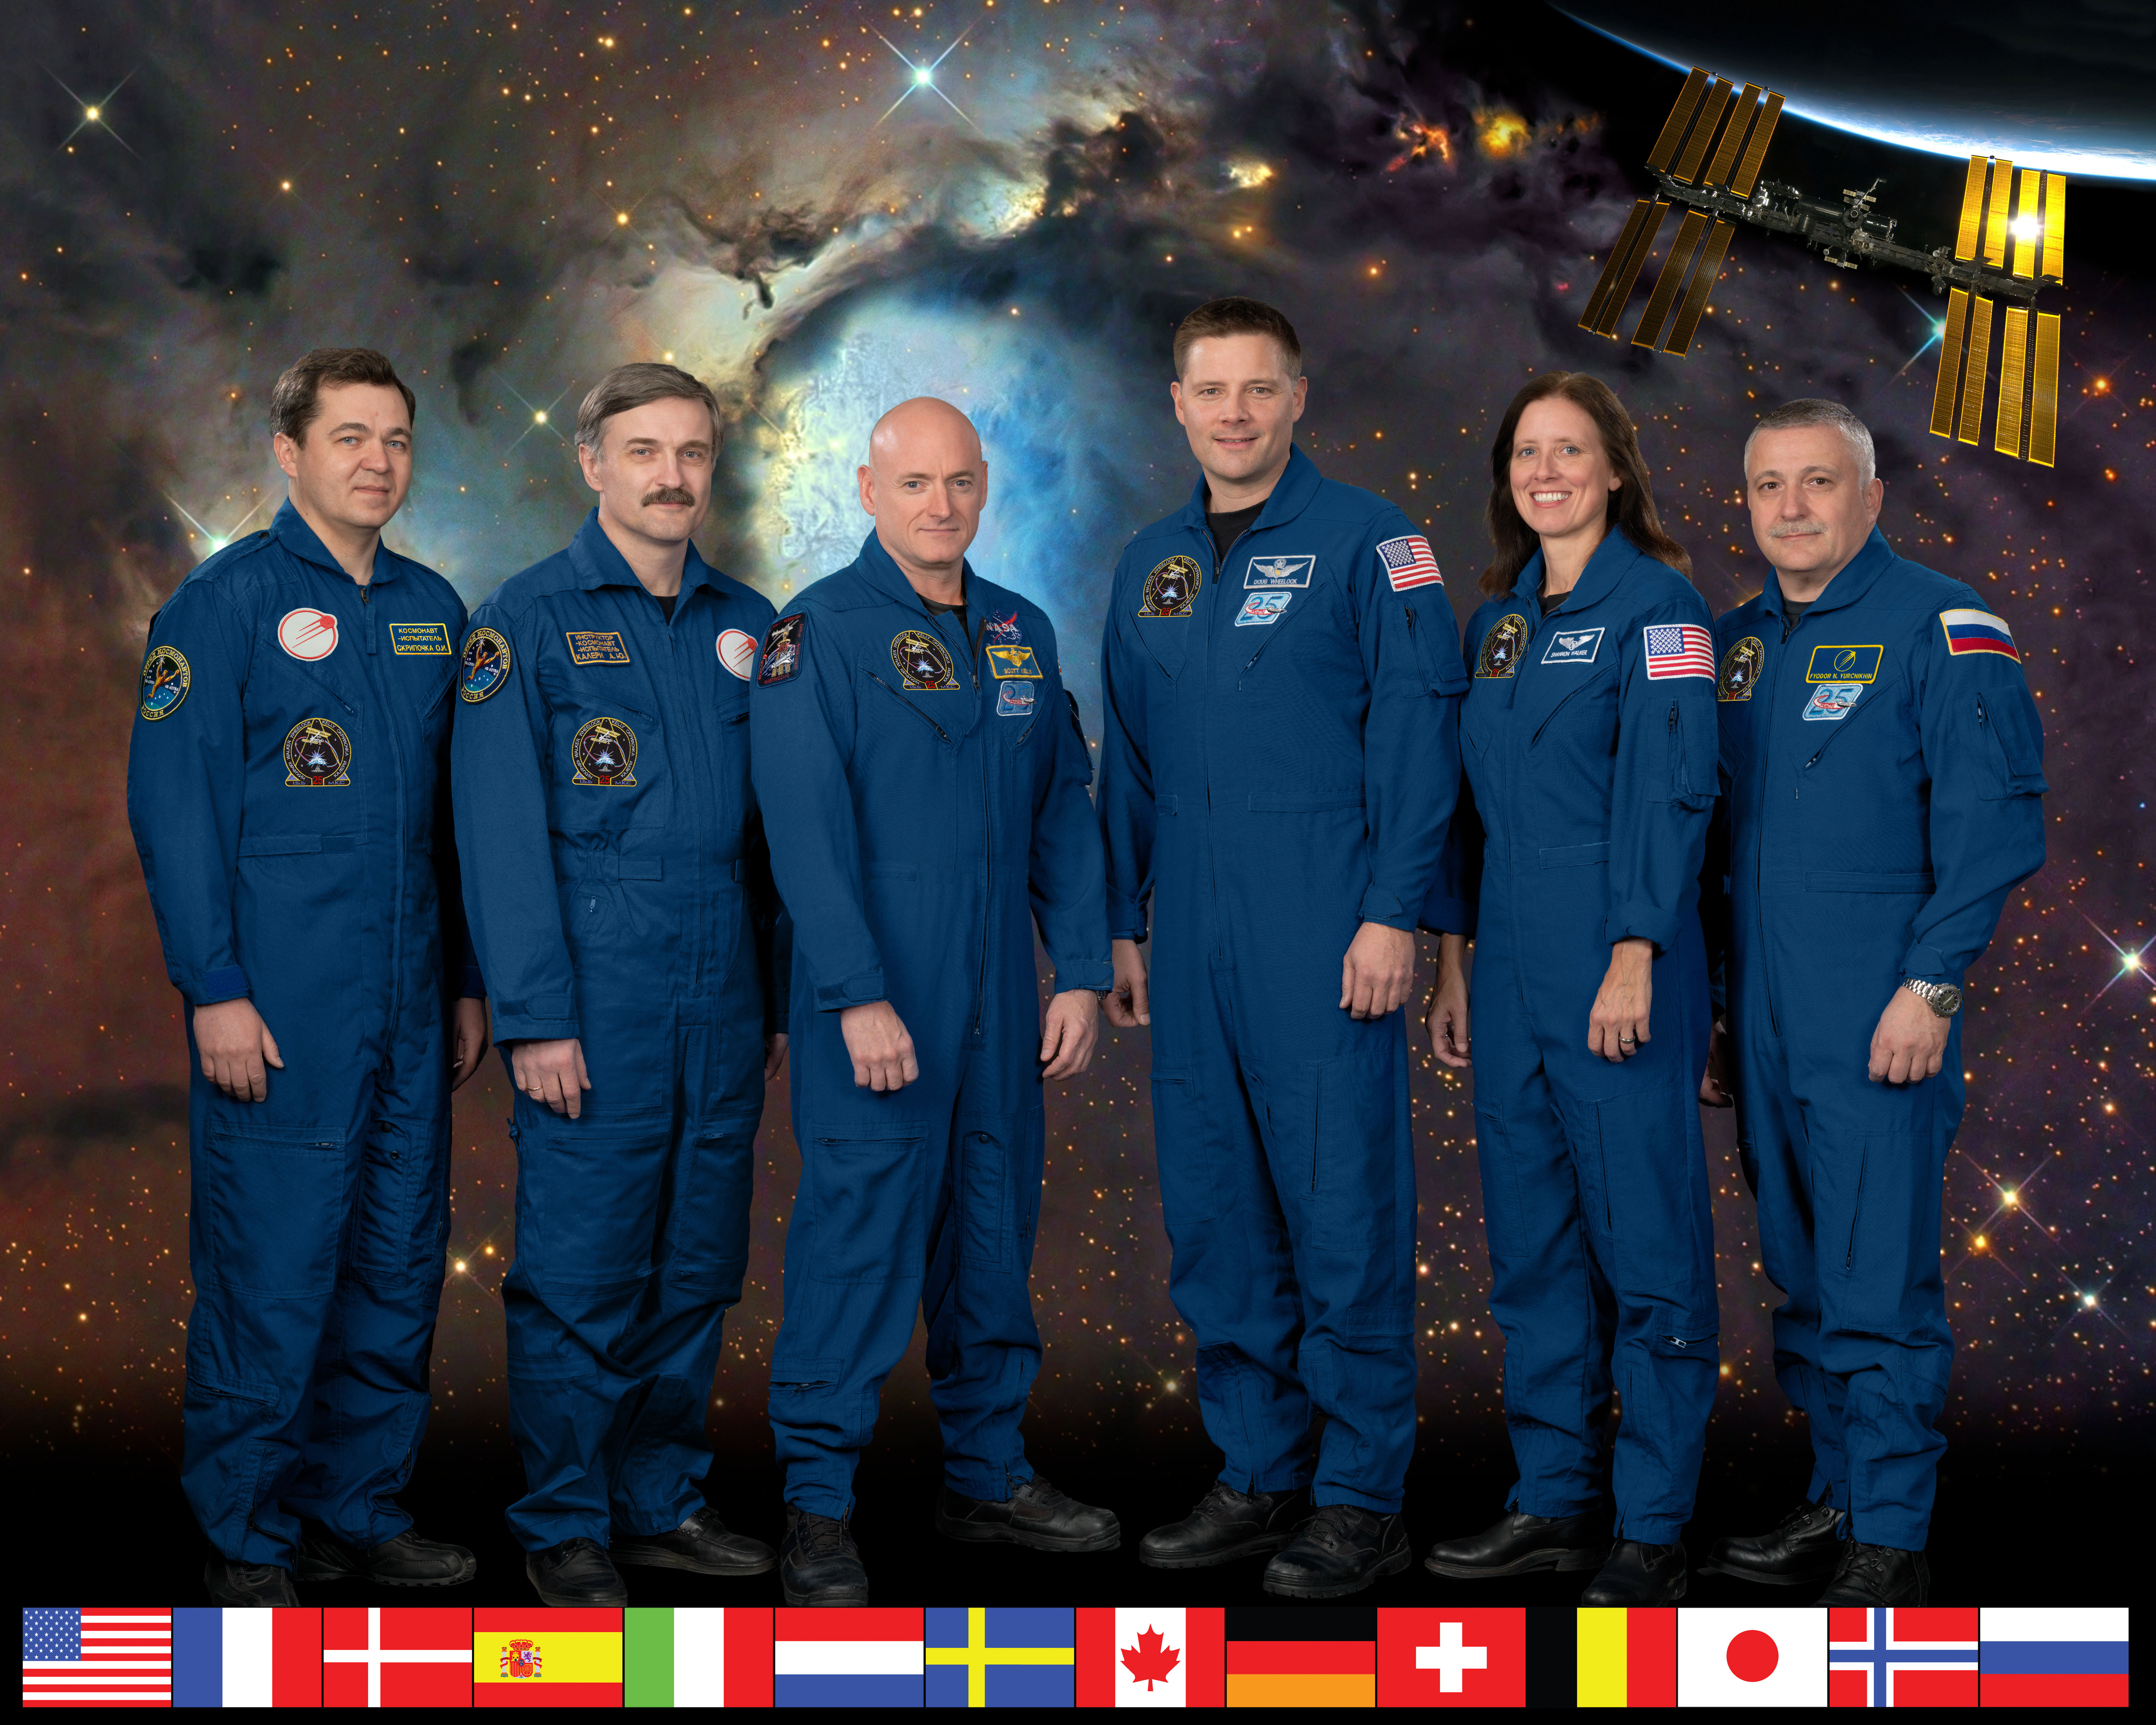 Expedition 25 Official Crew Portrait